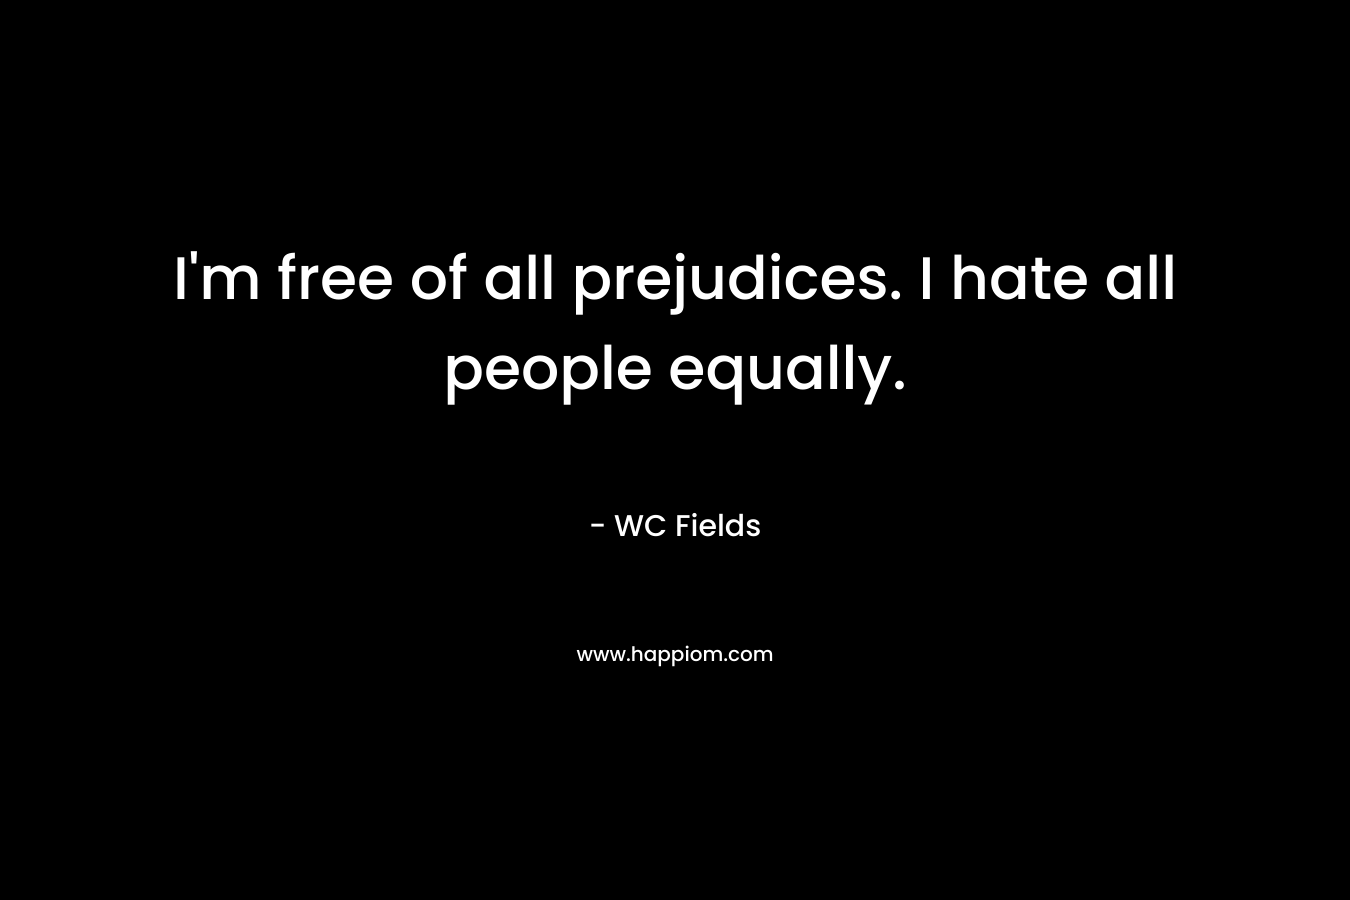 I'm free of all prejudices. I hate all people equally.